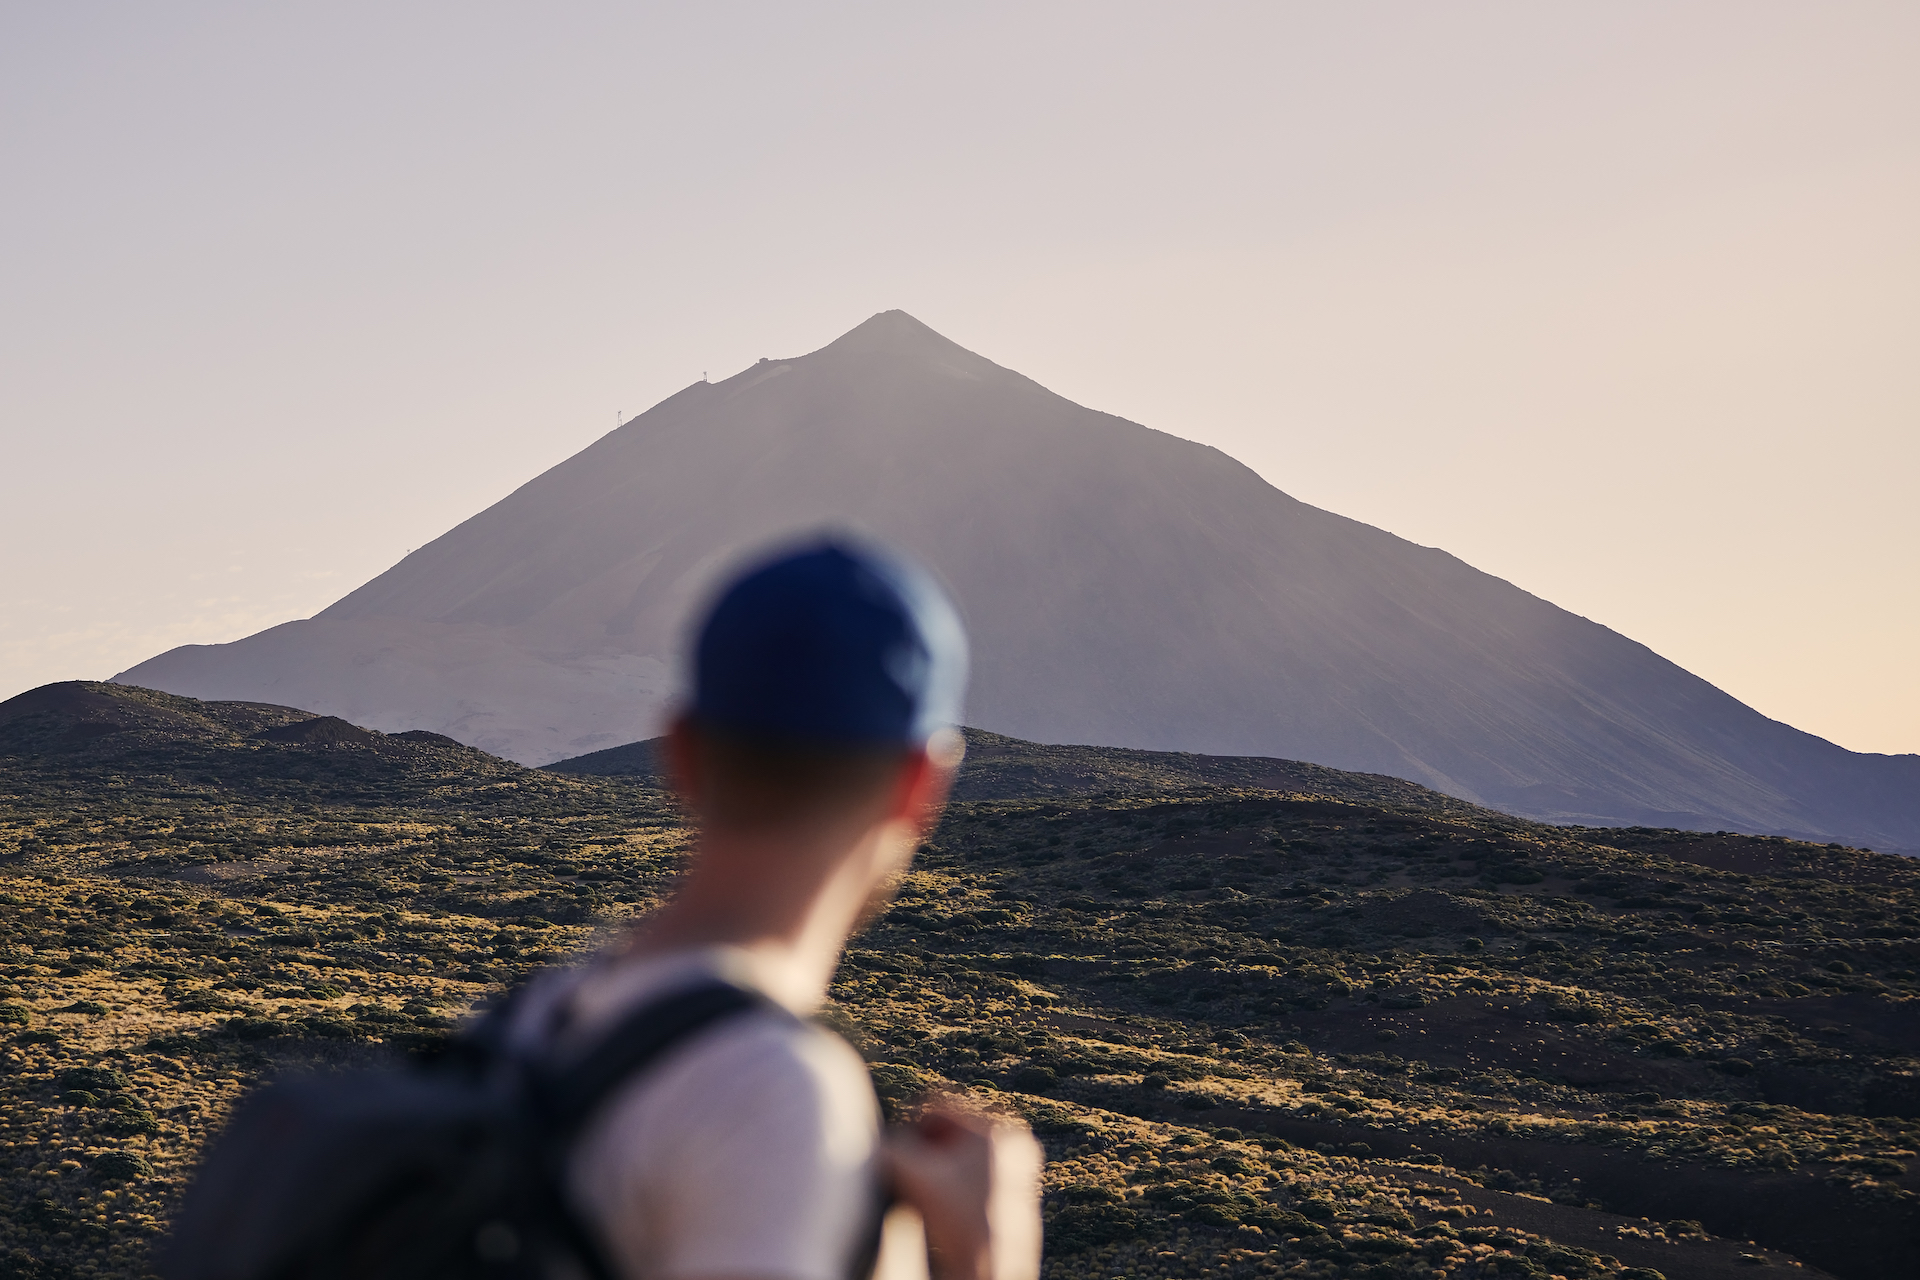 Traveler against landscape with Pico de Teide at dusk. Young man with backpack looking on volcano. Tenerife, Canary Islands, Spain.